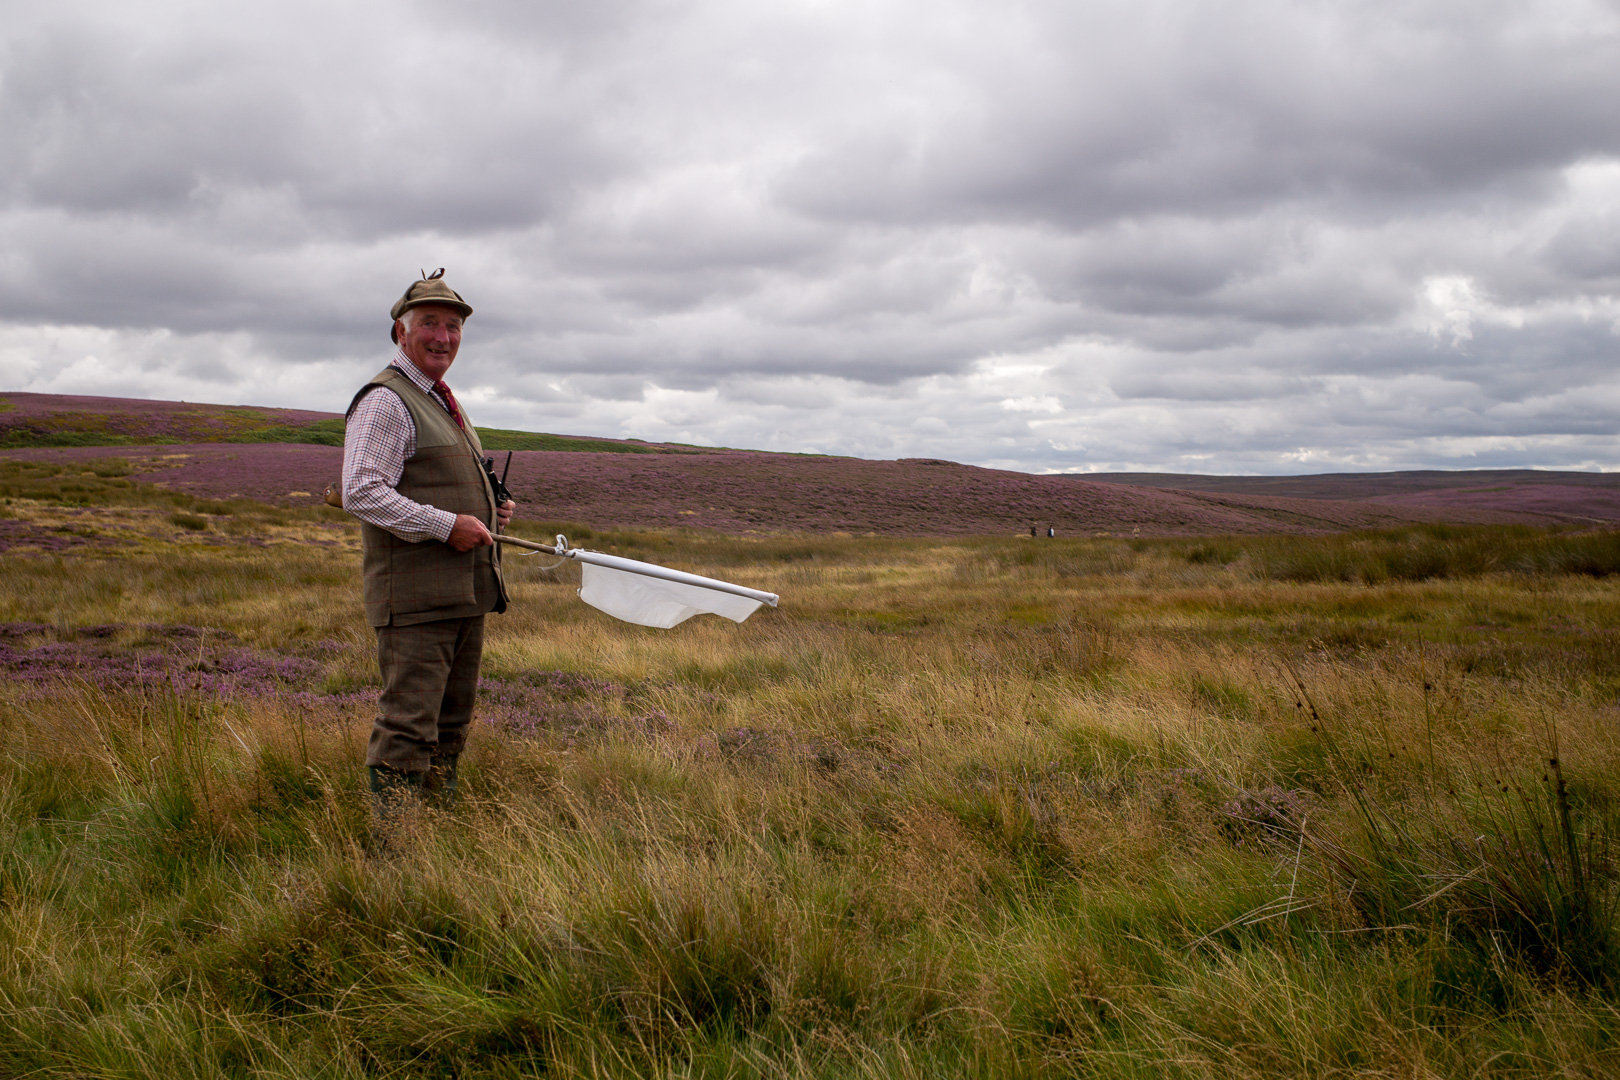 Its Grouse season, and this kind gentleman is ensuring us walkers don't stray too close to the carnage occurring in the background.